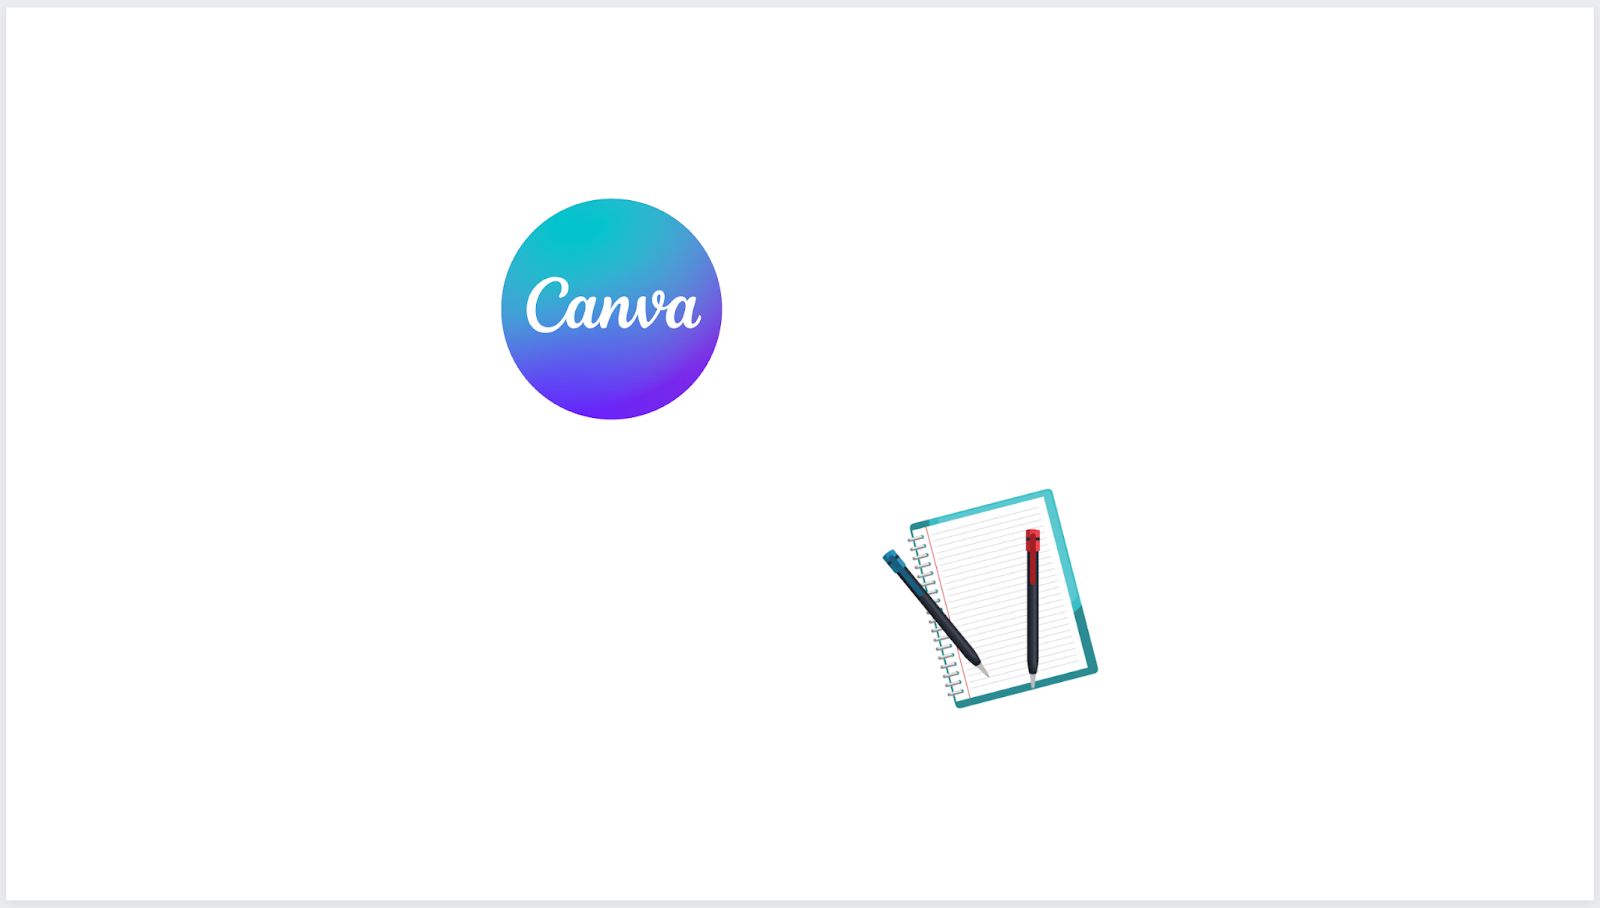 A basic design with two elements: a Canva logo and notepad.